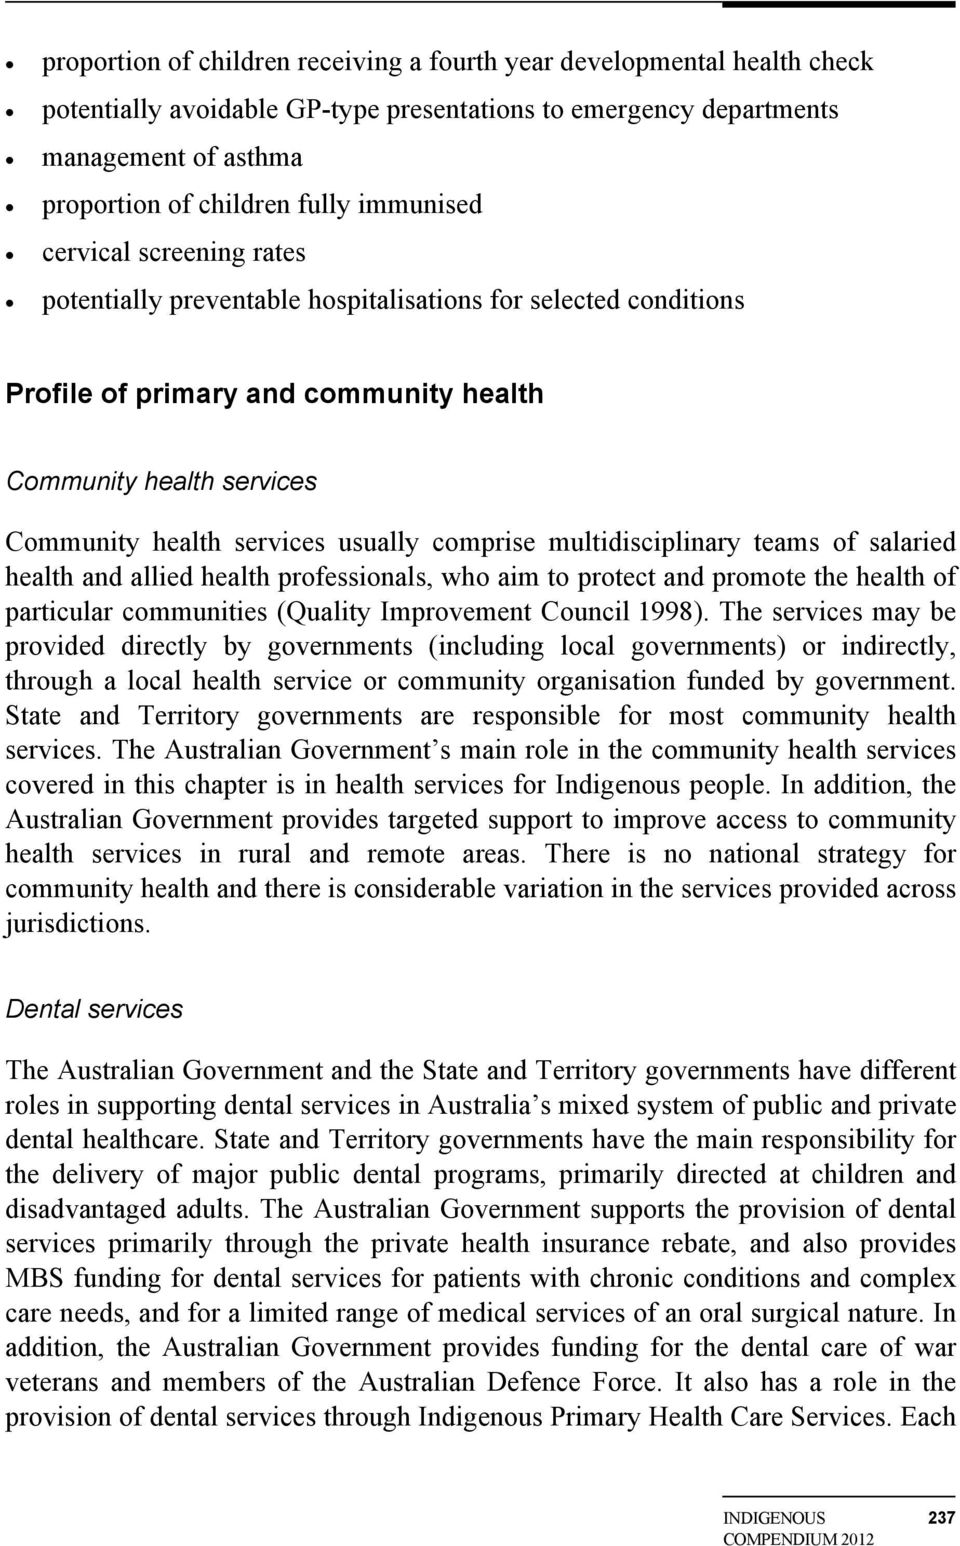 comprise multidisciplinary teams of salaried health and allied health professionals, who aim to protect and promote the health of particular communities (Quality Improvement Council 1998).